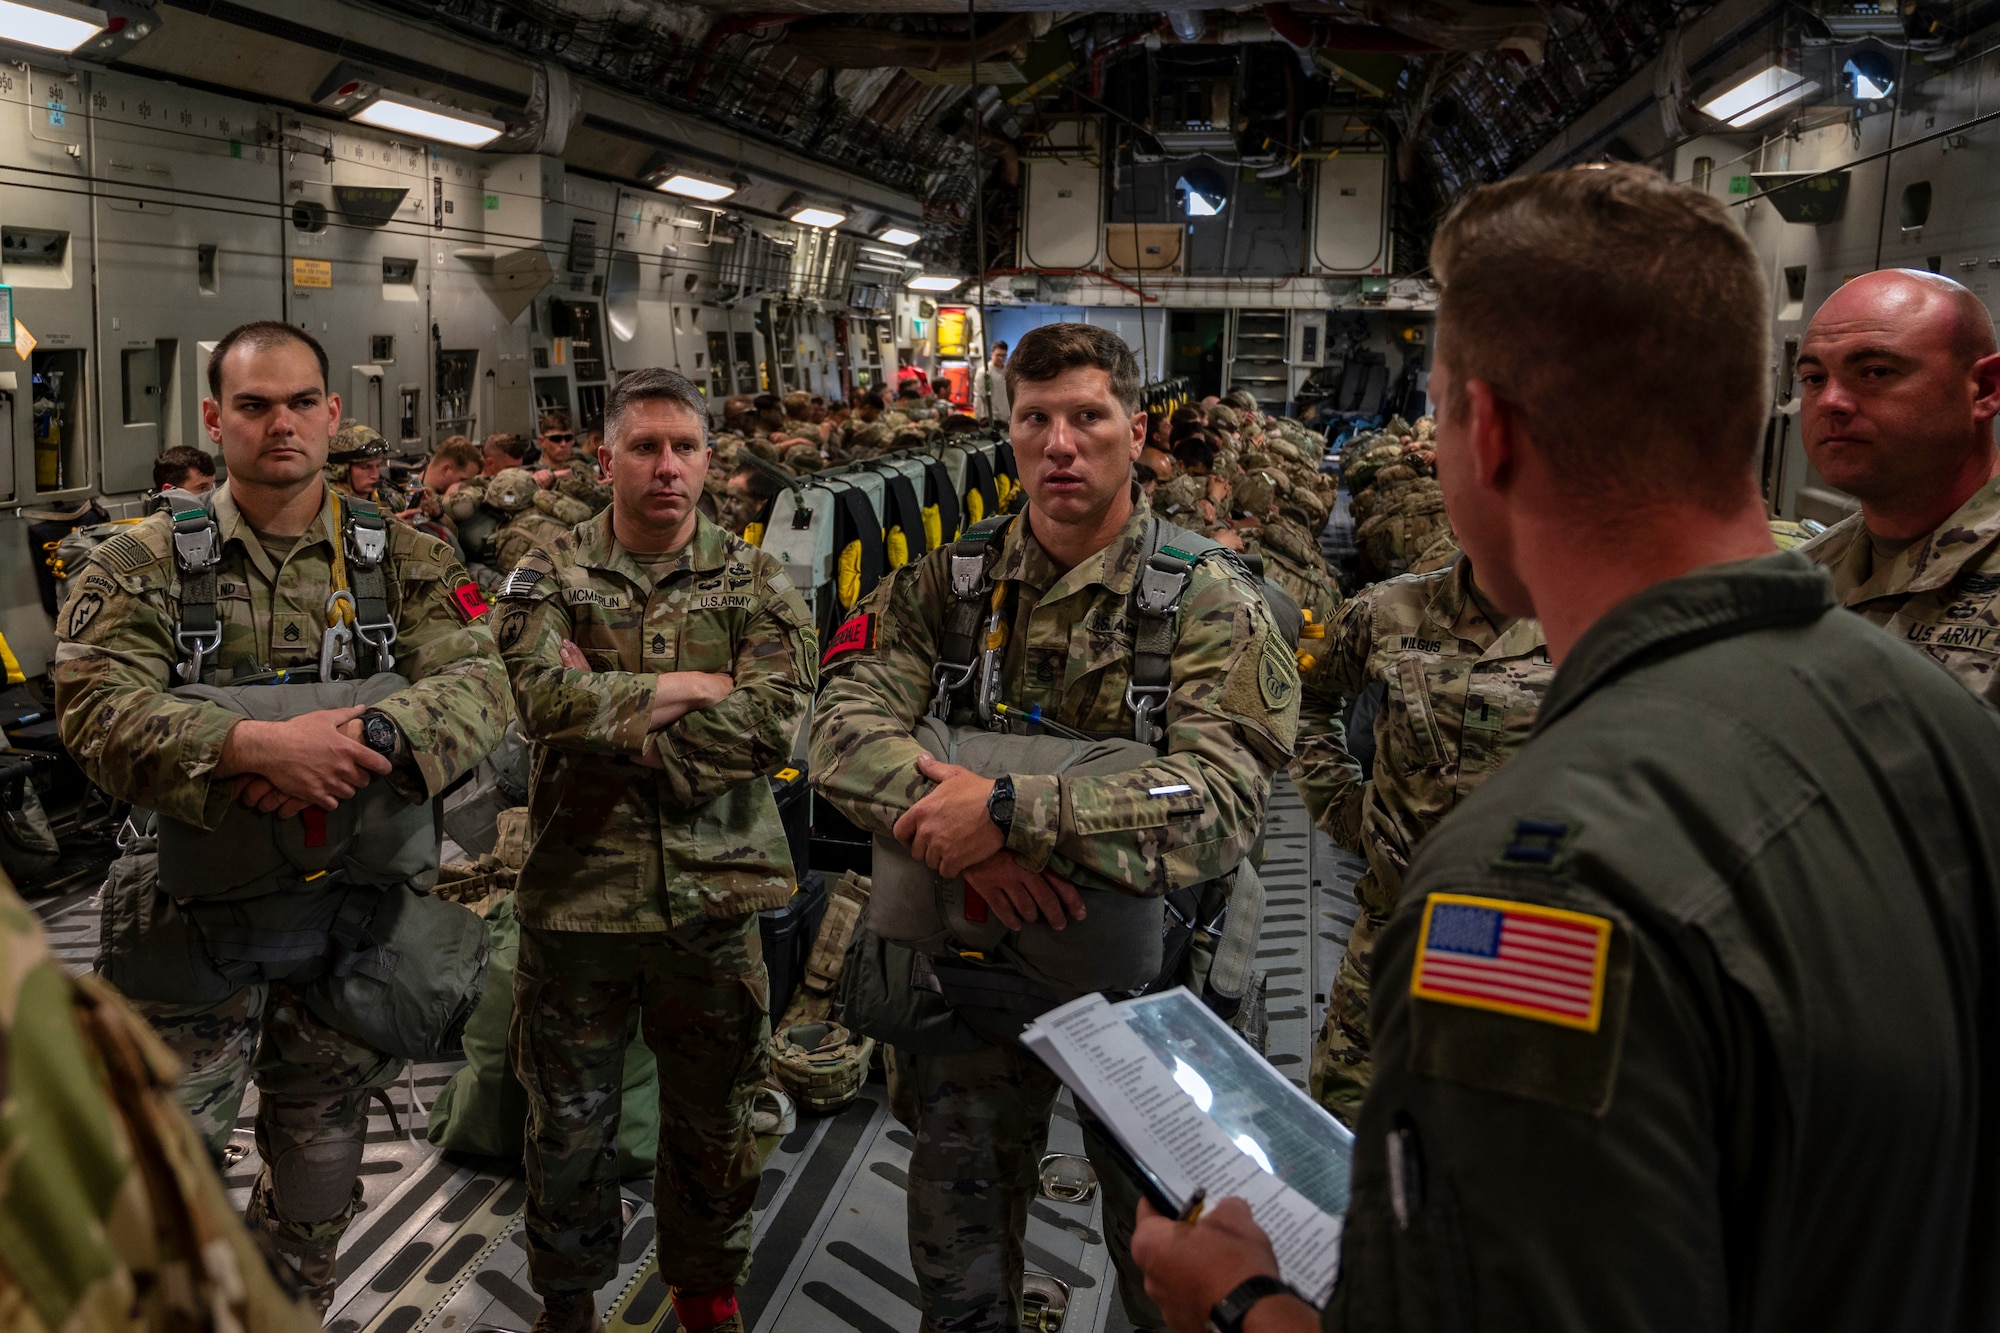 U.S. Air Force C-17 Globemaster III crew from the 517th Airlift Squadron and U.S. Army Paratroopers from the 2nd Infantry Brigade Combat Team (Airborne), 11th Airborne Division, conduct a preflight brief prior to a static line jump at Allen Army Airfield, Fort Greely, Alaska, June 15, 2022 during RED FLAG-Alaska 2202. Approximately 1,600 service members from three nations participate in flying, maintaining and supporting more than 70 aircraft from over 22 units during this iteration of exercise. (U.S. Air Force photo by Sheila deVera)